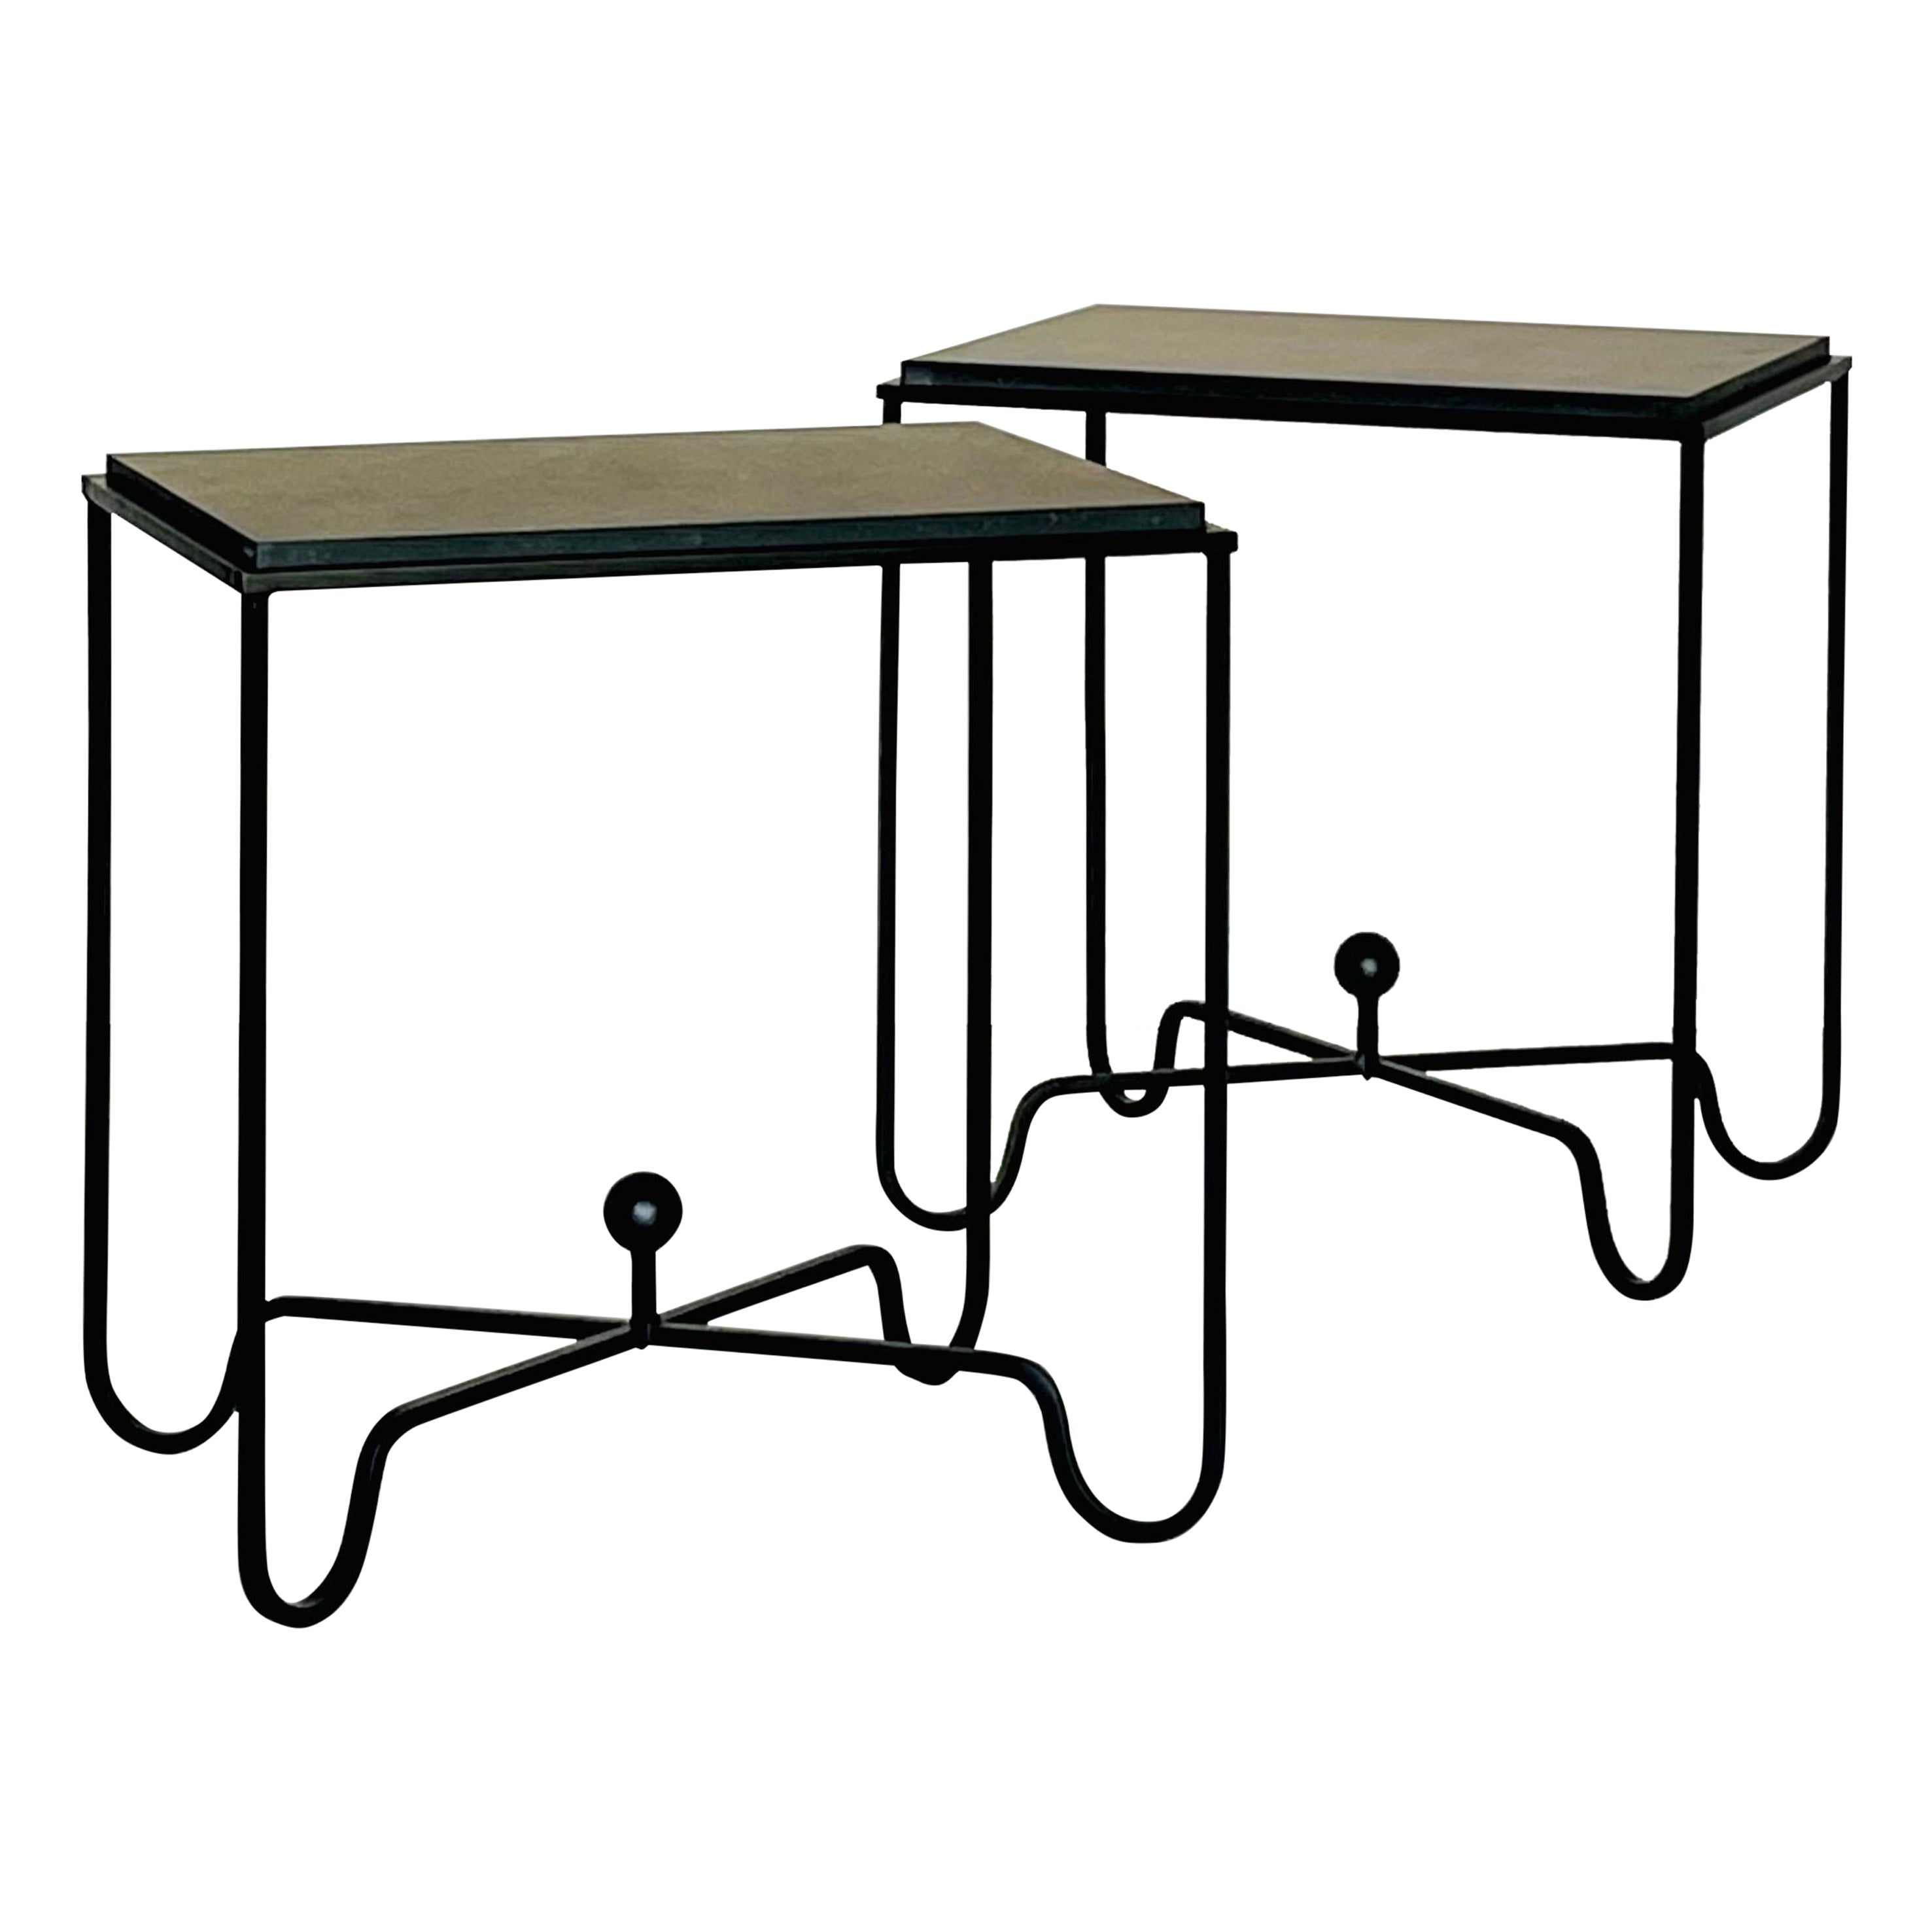 Black Limestone Entretoise side tables or small nightstands by Design Frères For Sale